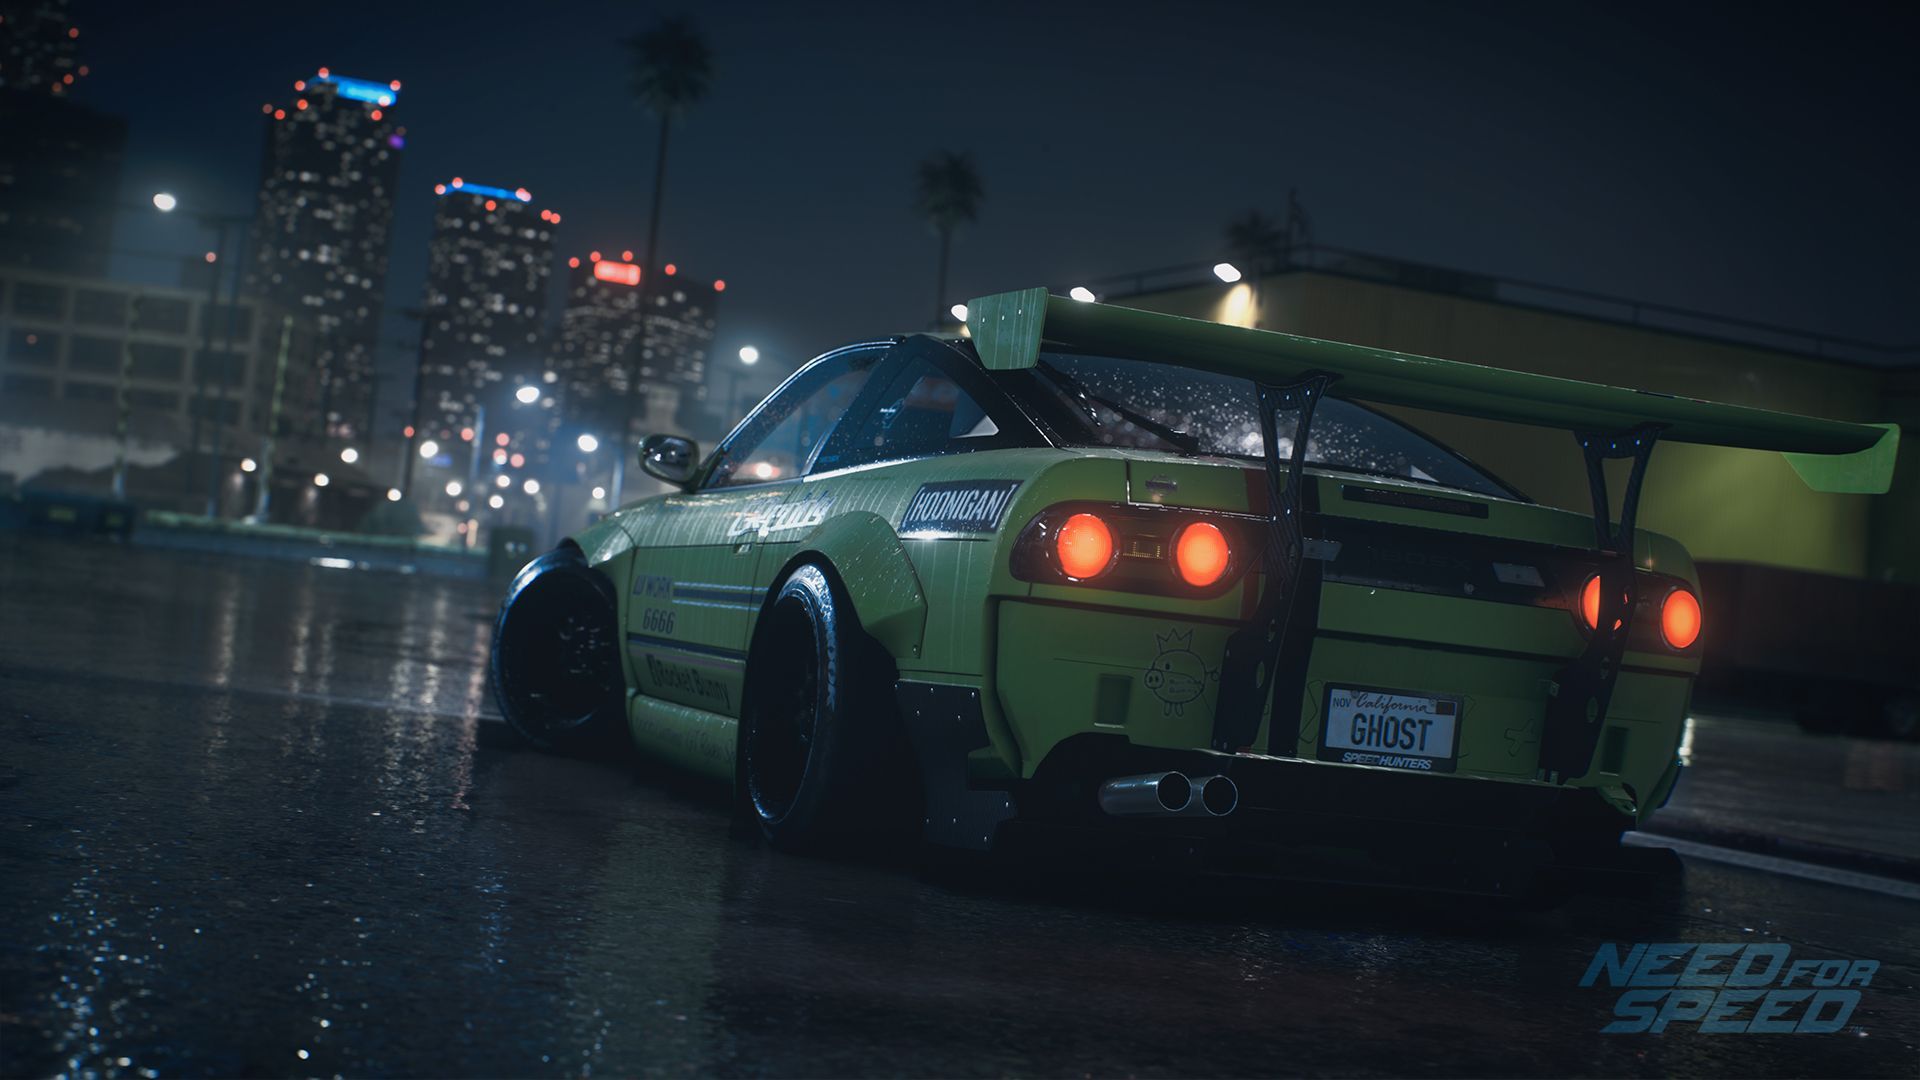 NightCloudsRainRide. Need for speed, Police car lights, Nissan 180sx